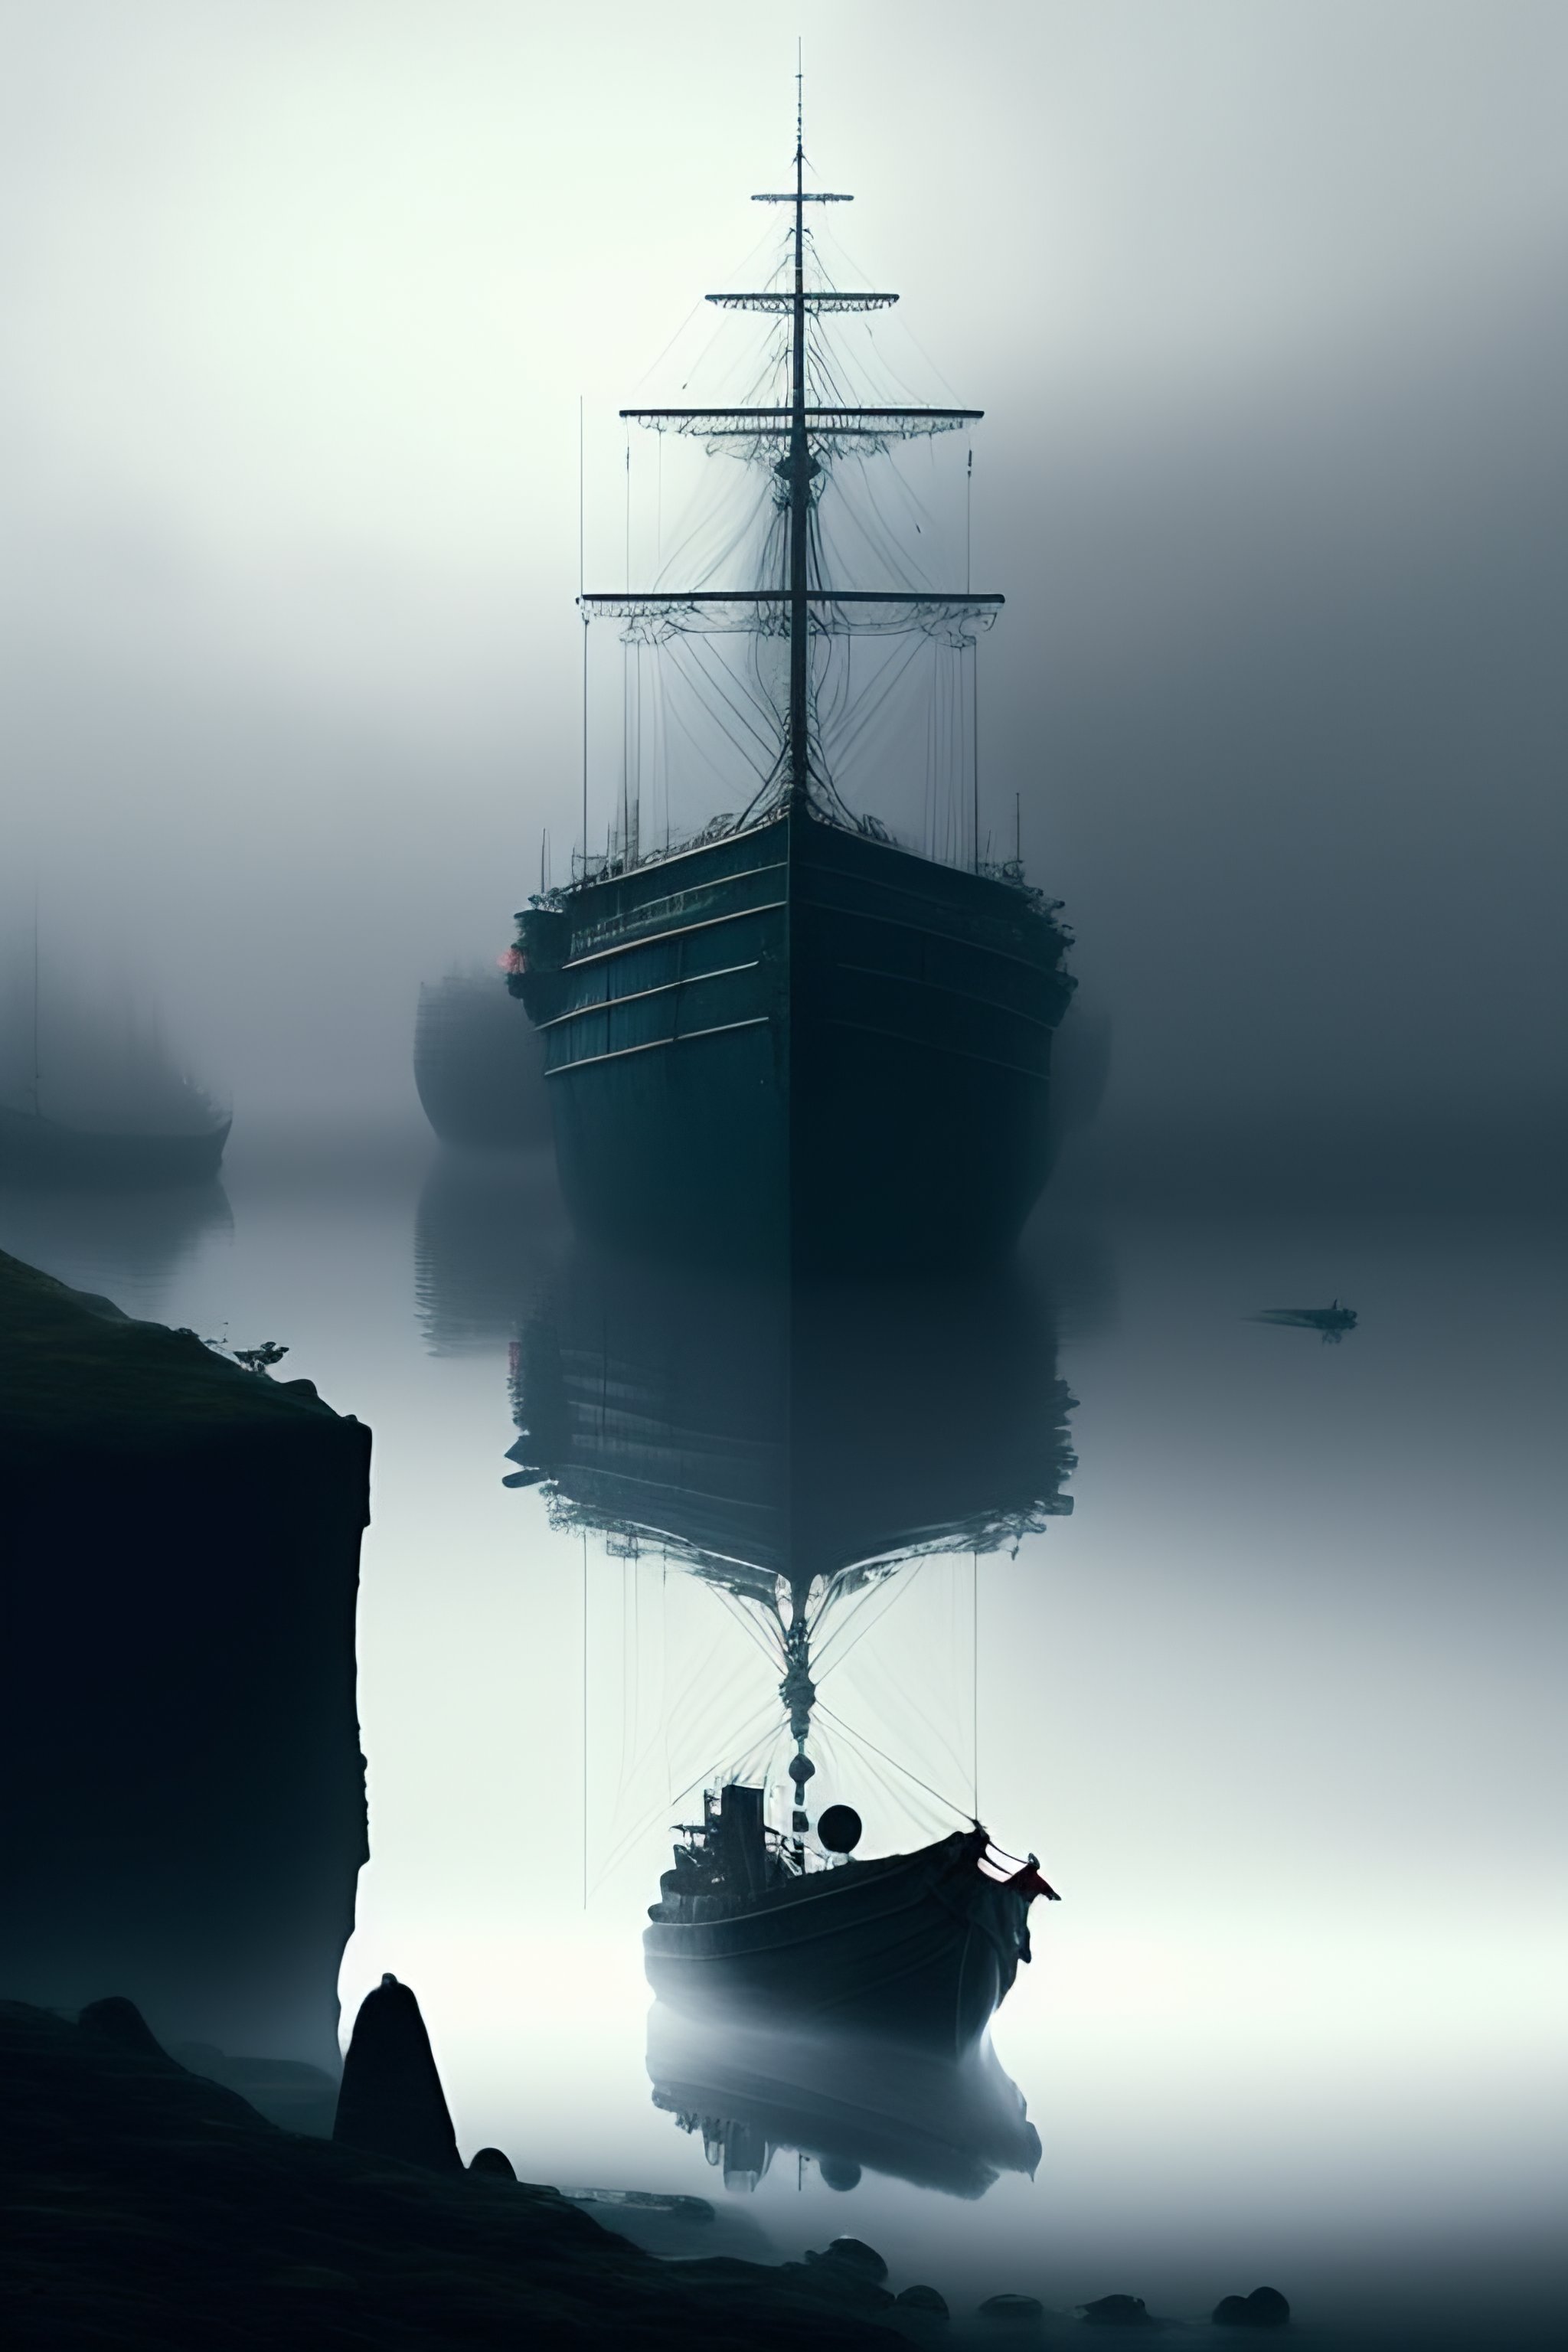 Lexica - A bone ship in a foggy harbour, anchored to port with electric  ropes a rope ladder dangles from the side